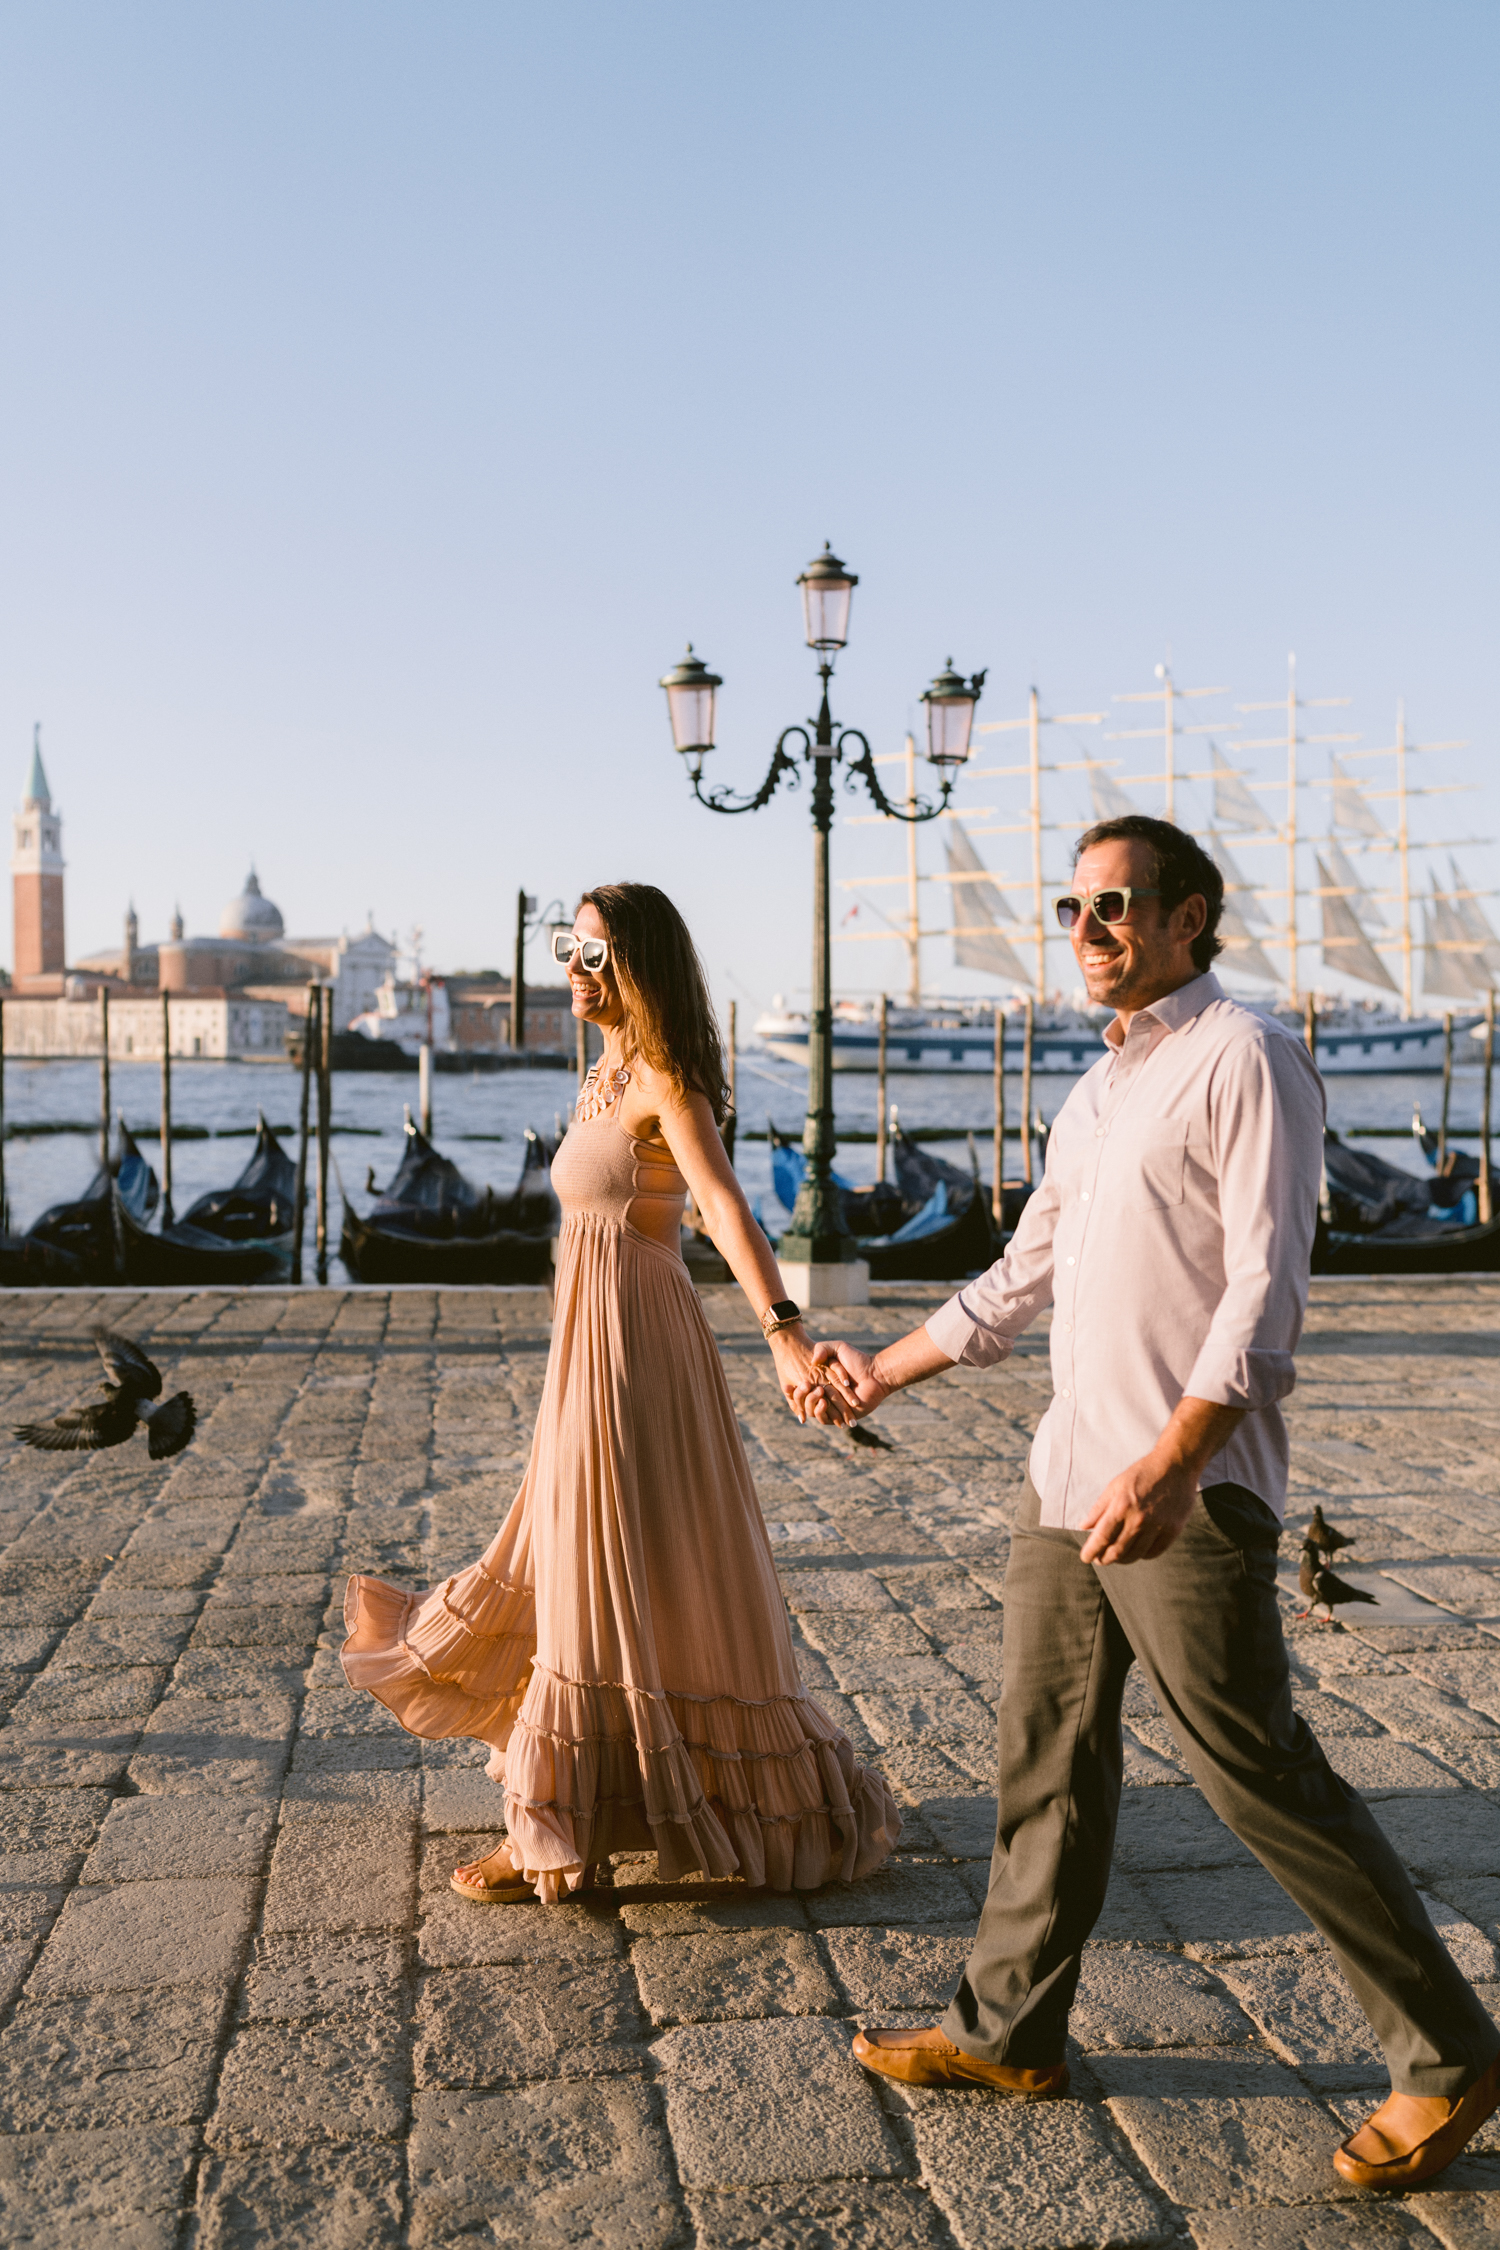 Sunrise candid photoshoot in Venice, Italy, for a couple.